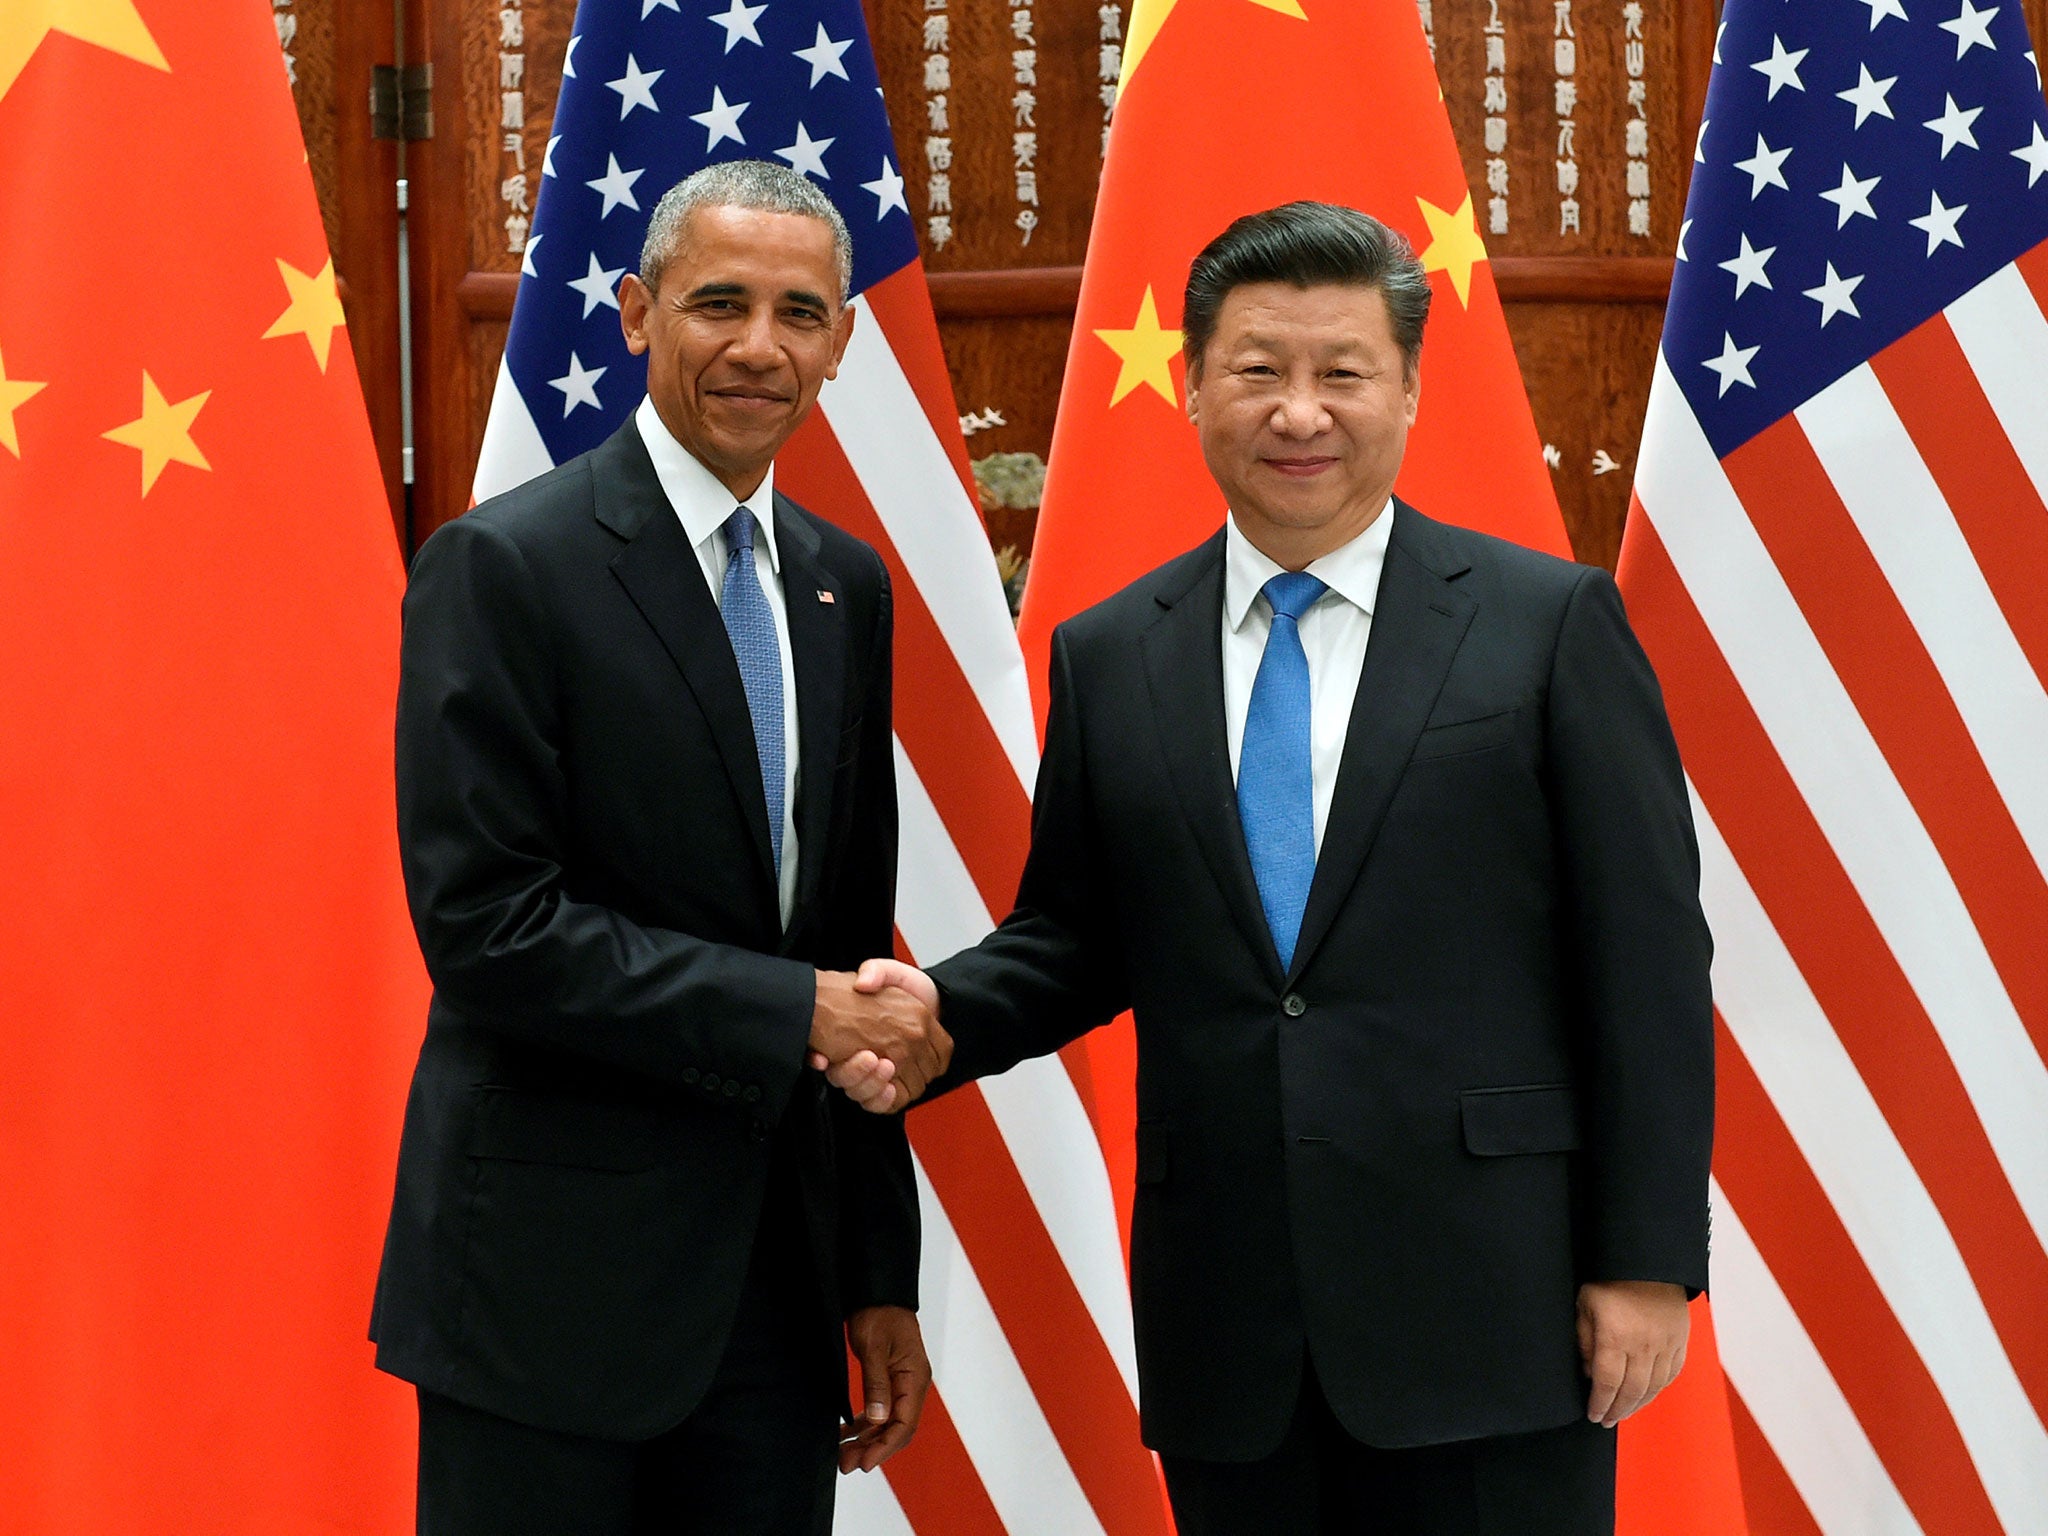 President Xi Jinping and Barack Obama after ratifying the agreement at the G20 summit in Hangzhou, China on Saturday